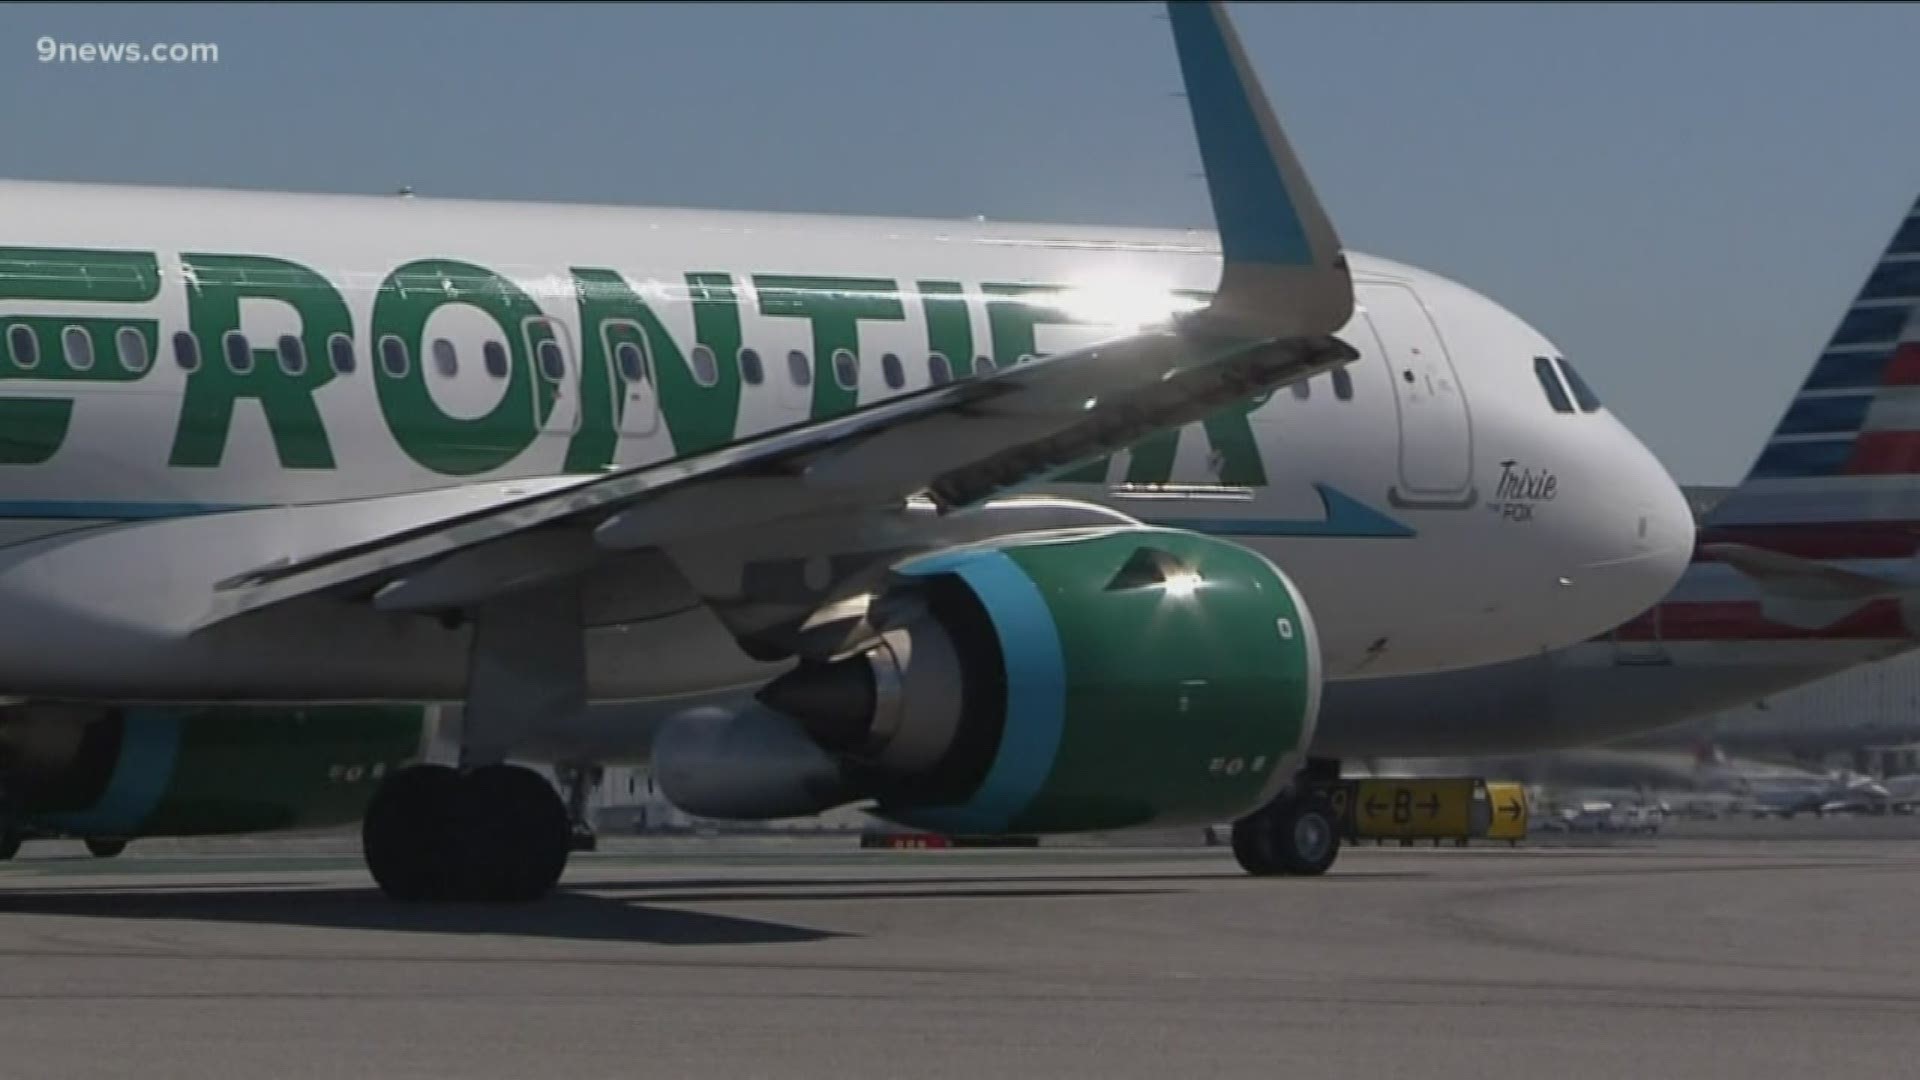 The Frontier Airlines employees say they were forced to take unpaid leave at the end of their pregnancies with no alternatives. Frontier has denied the allegations.